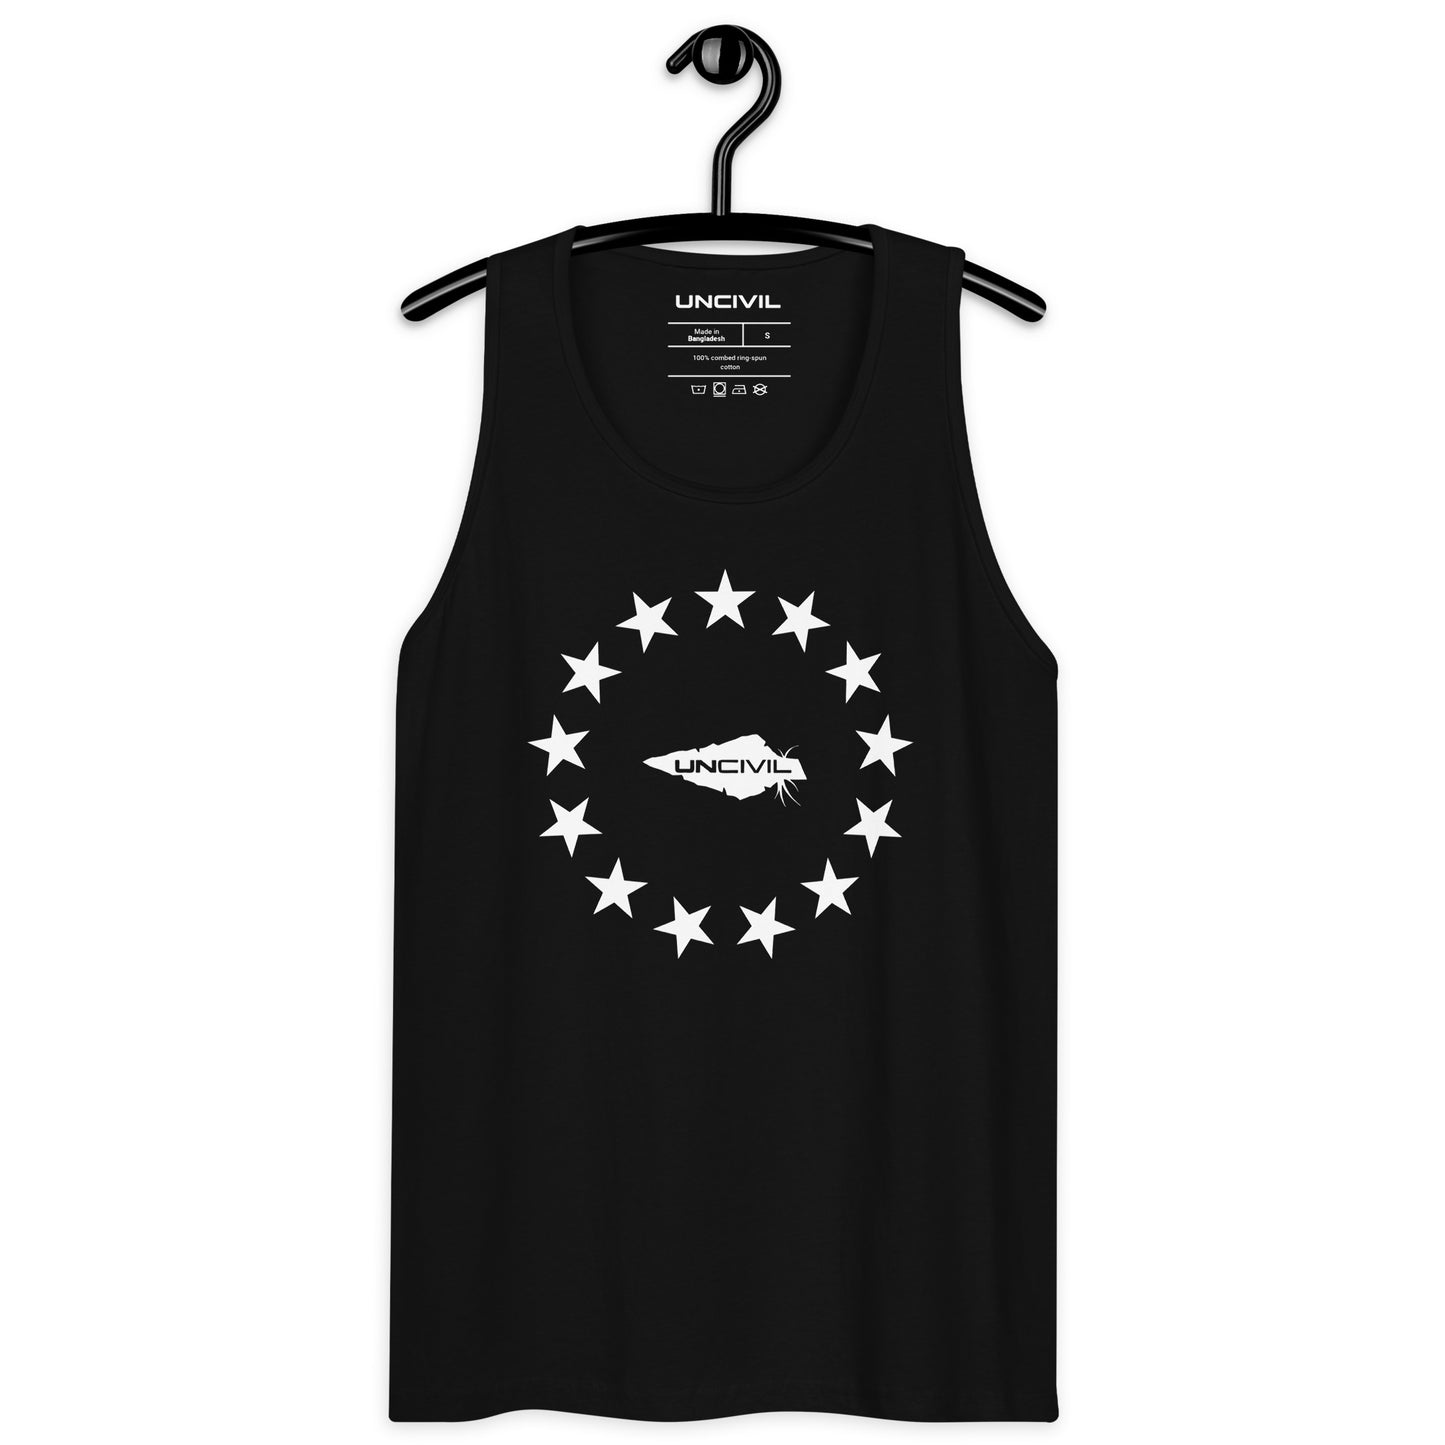 Betsy Ross men's tank top. Featuring the iconic 13 stars design, this tank is perfect for anyone who loves America and its rich history. Black and white.